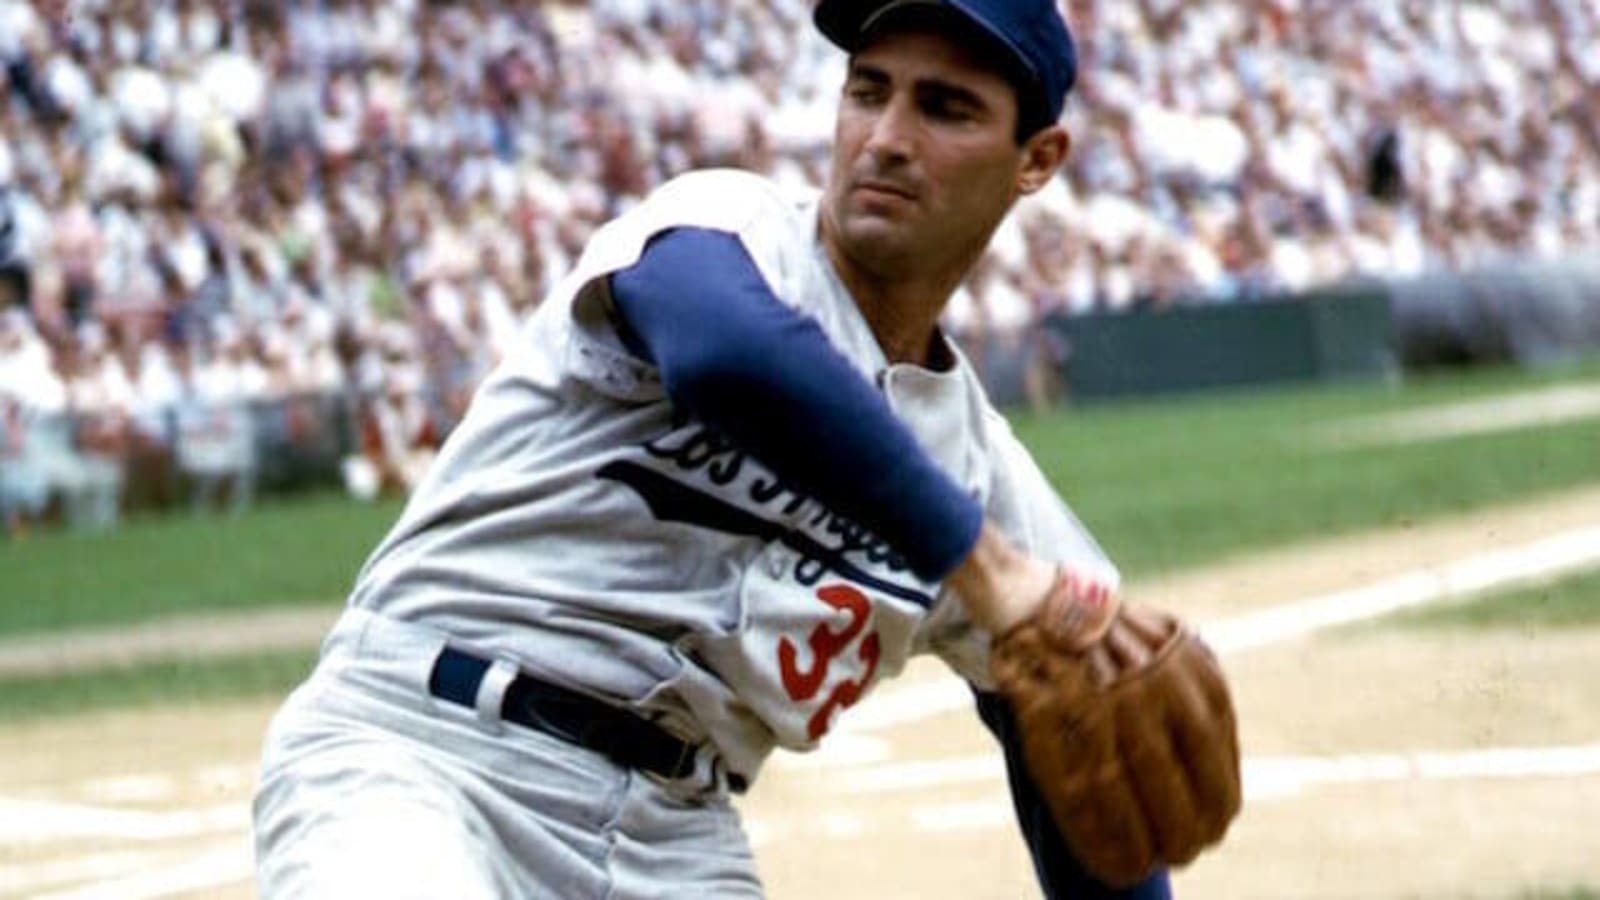 This Day In Dodgers History: Sandy Koufax Complete Game On Two Days’ Rest In 1965 World Series